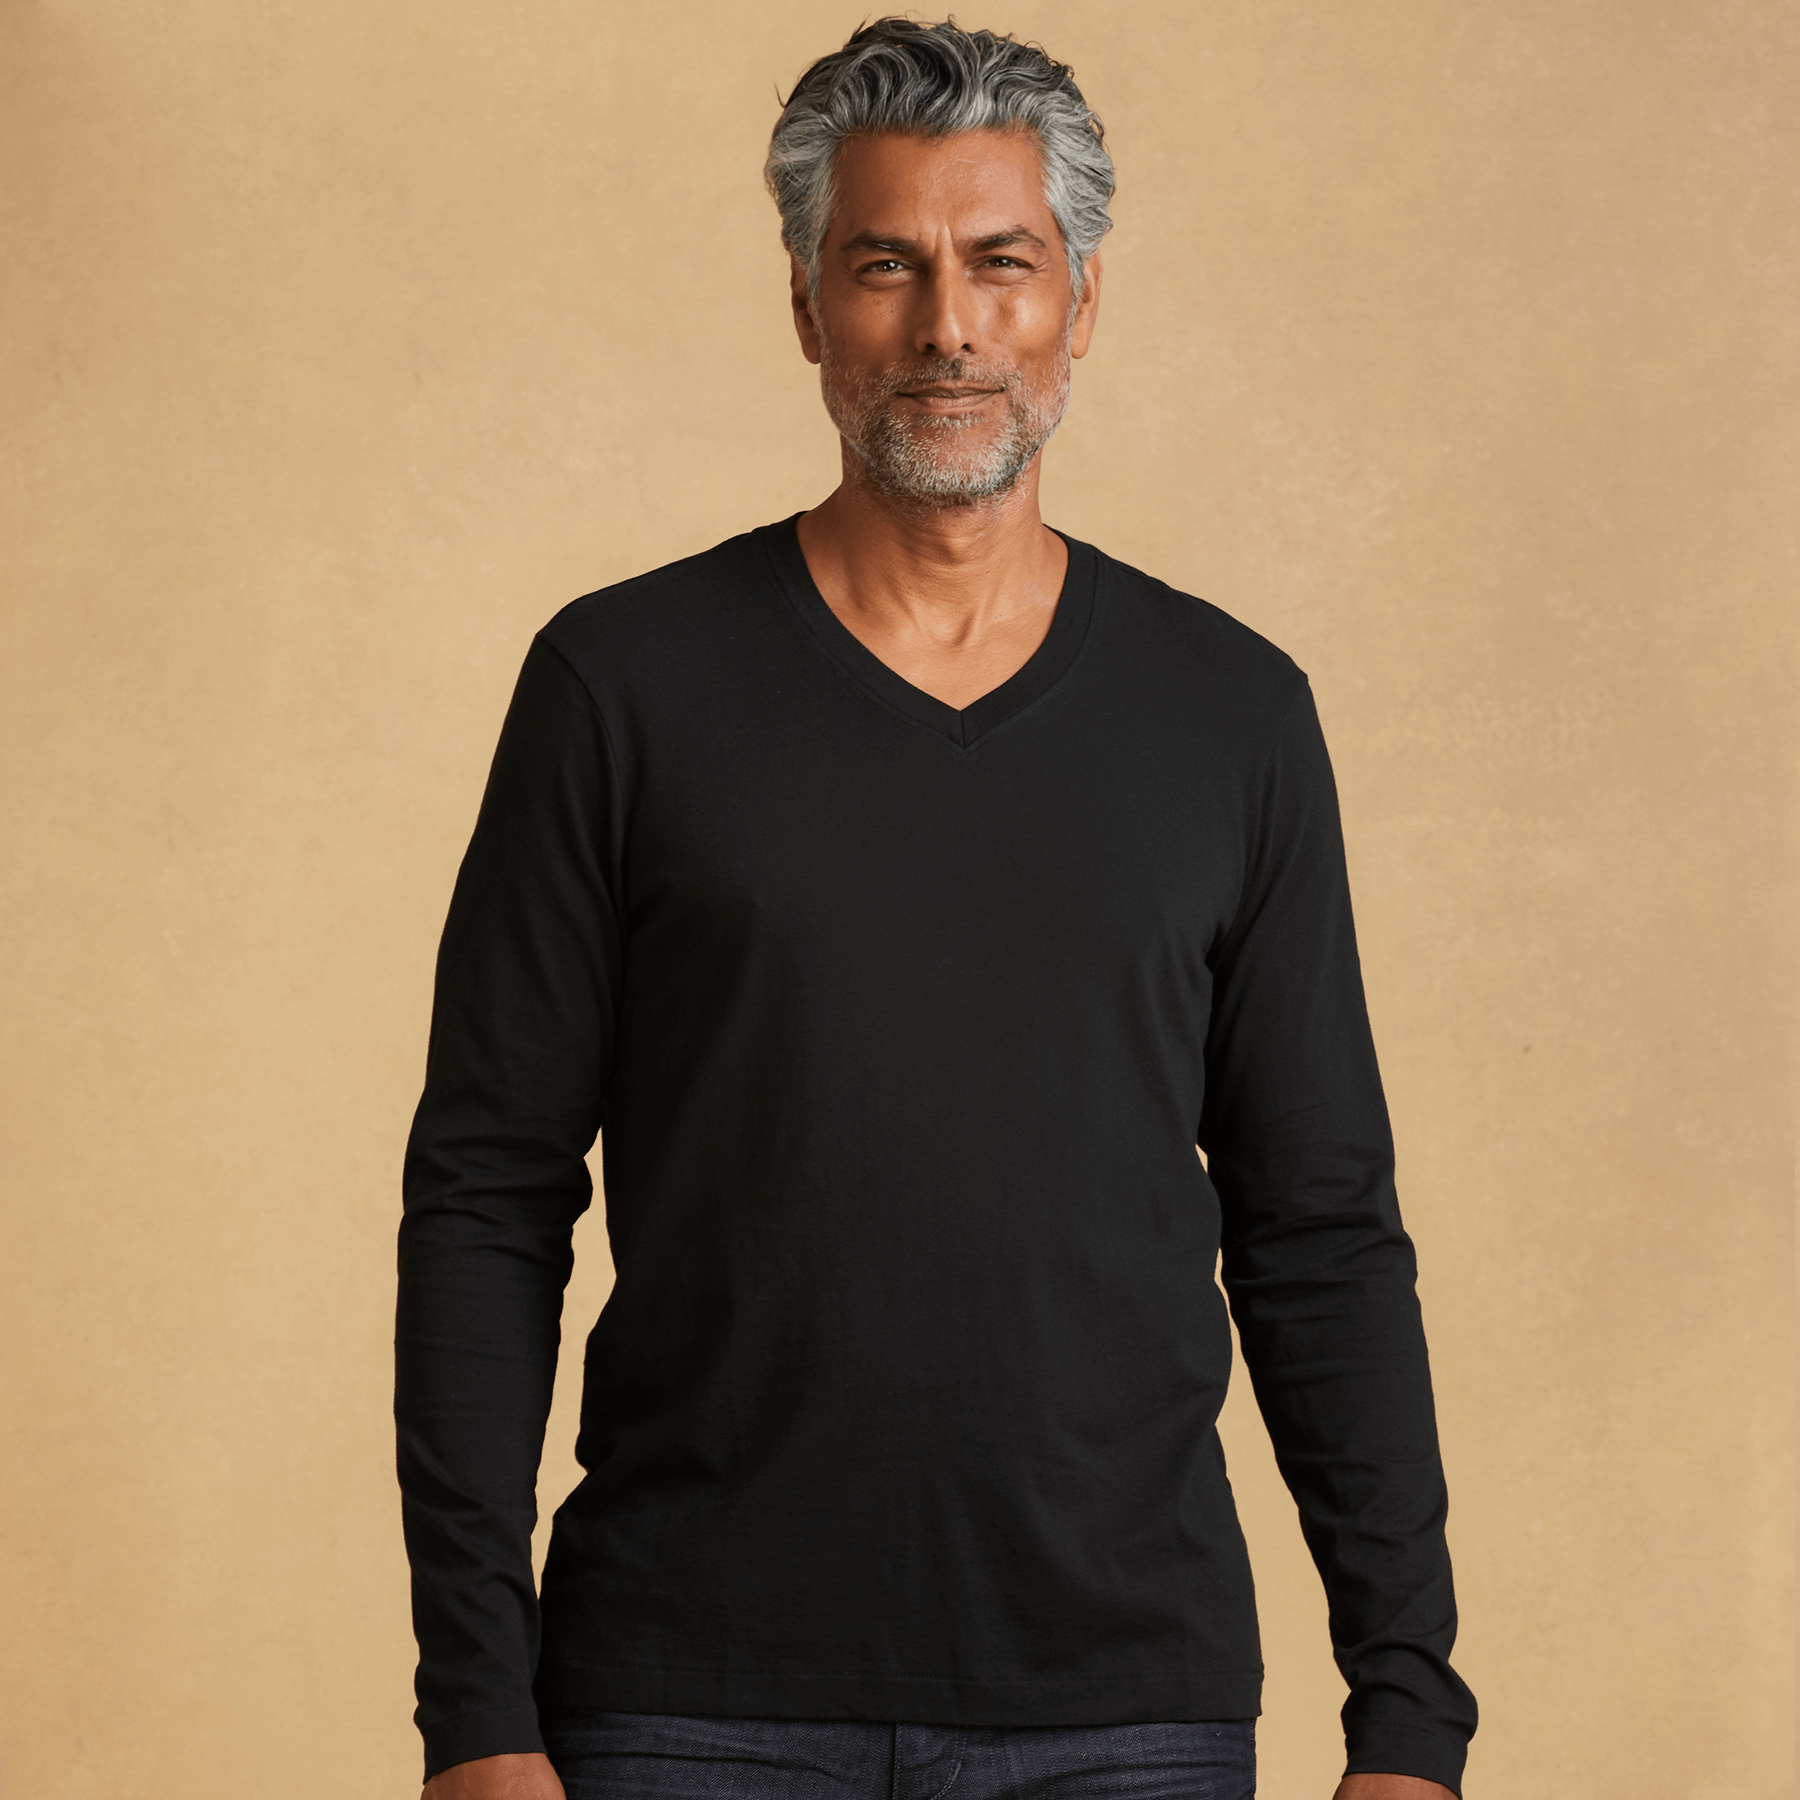 The Classic T-Shirt Company: Luxury Cotton T-Shirts for Sale